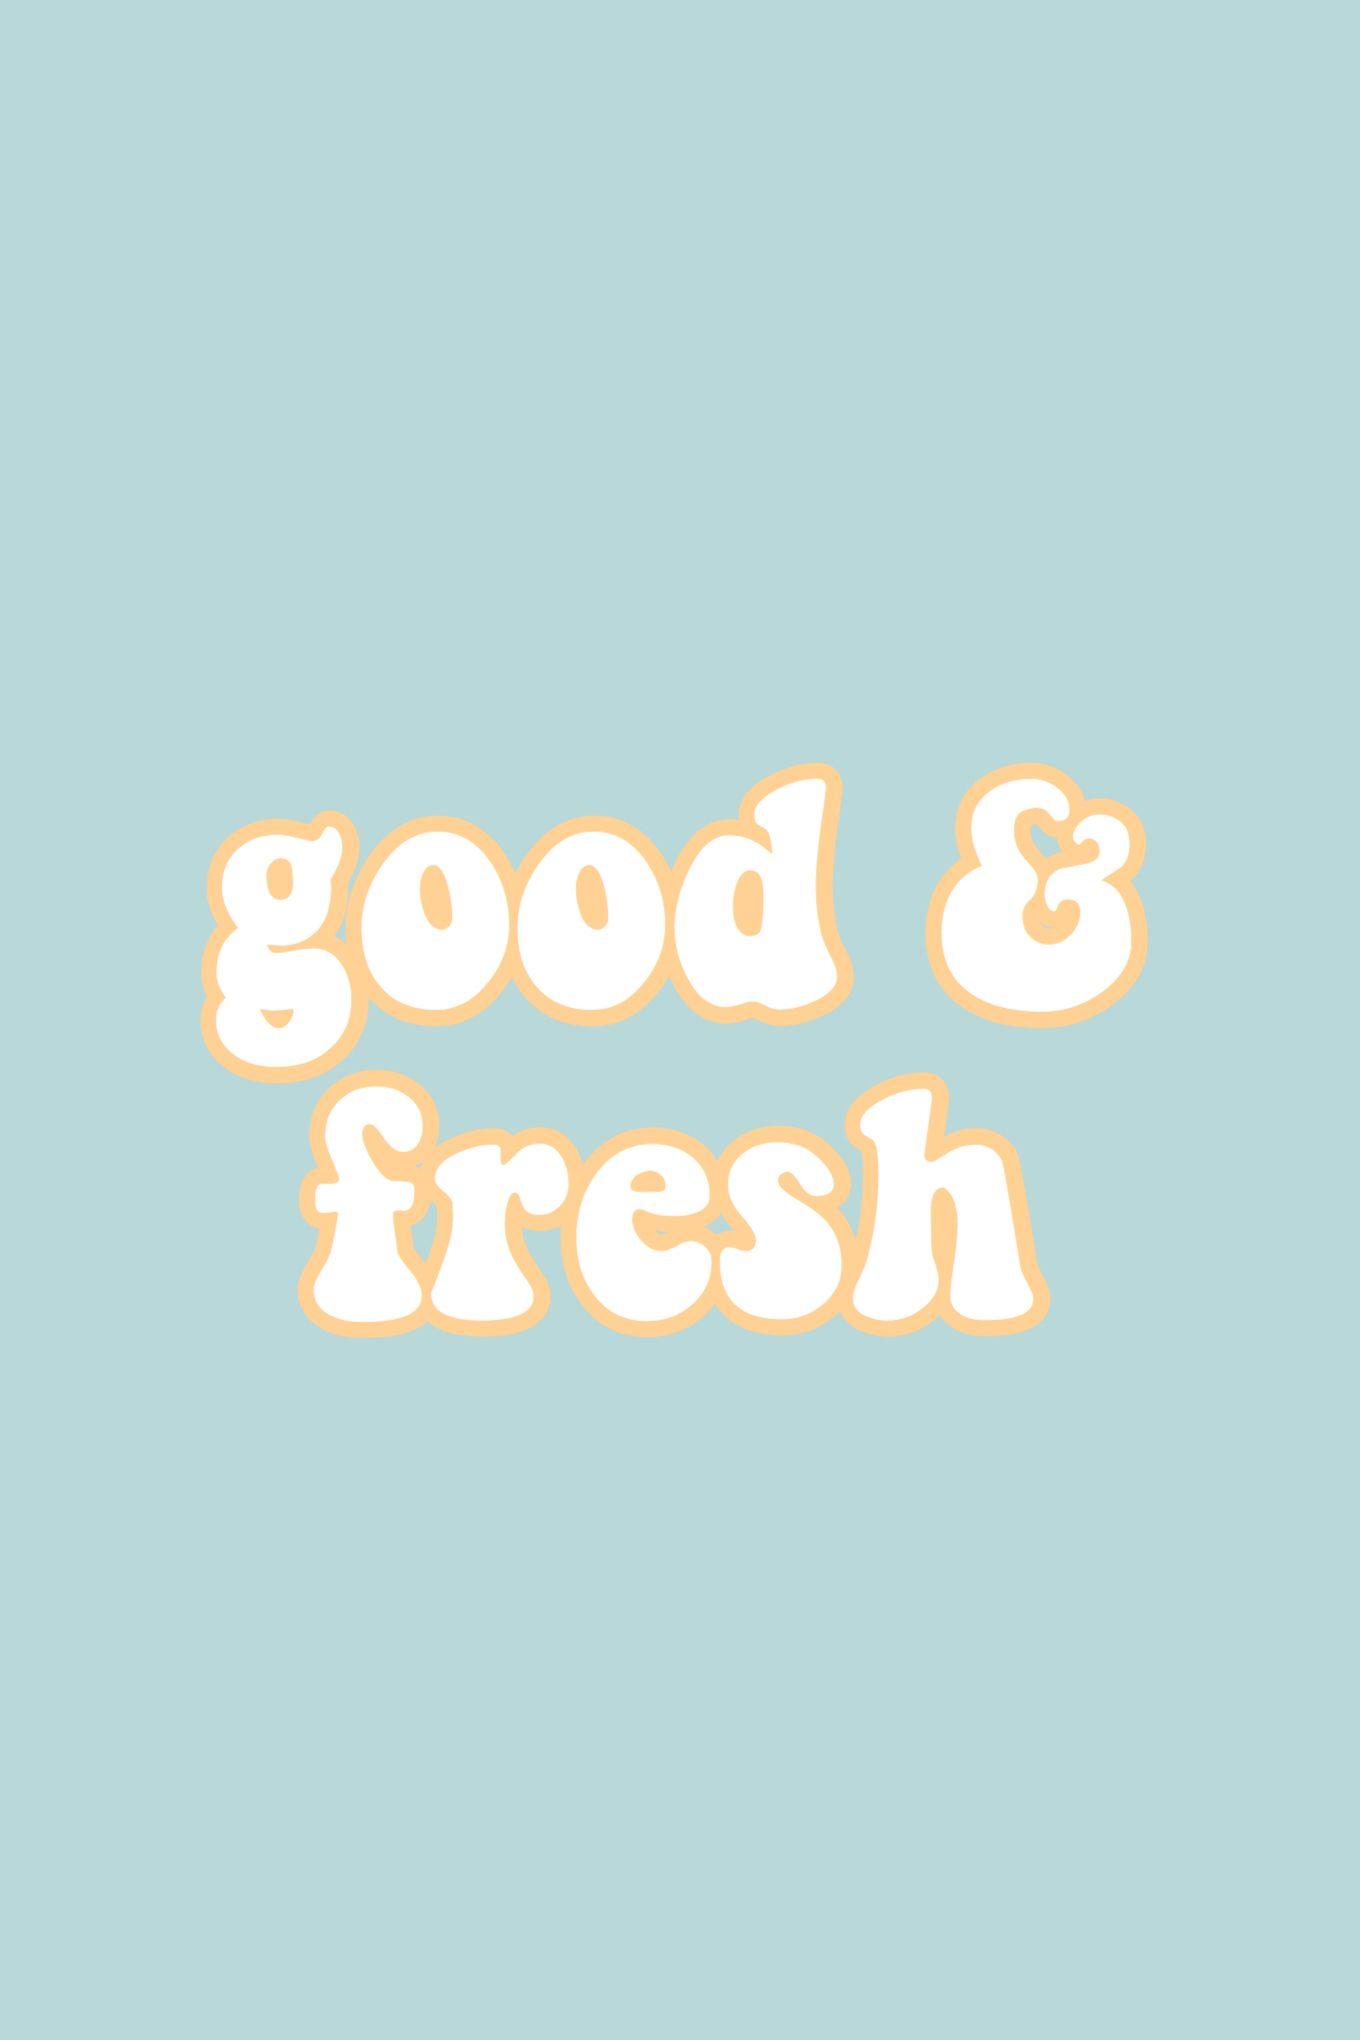 good and fresh quote words teal yellow aesthetic iphone